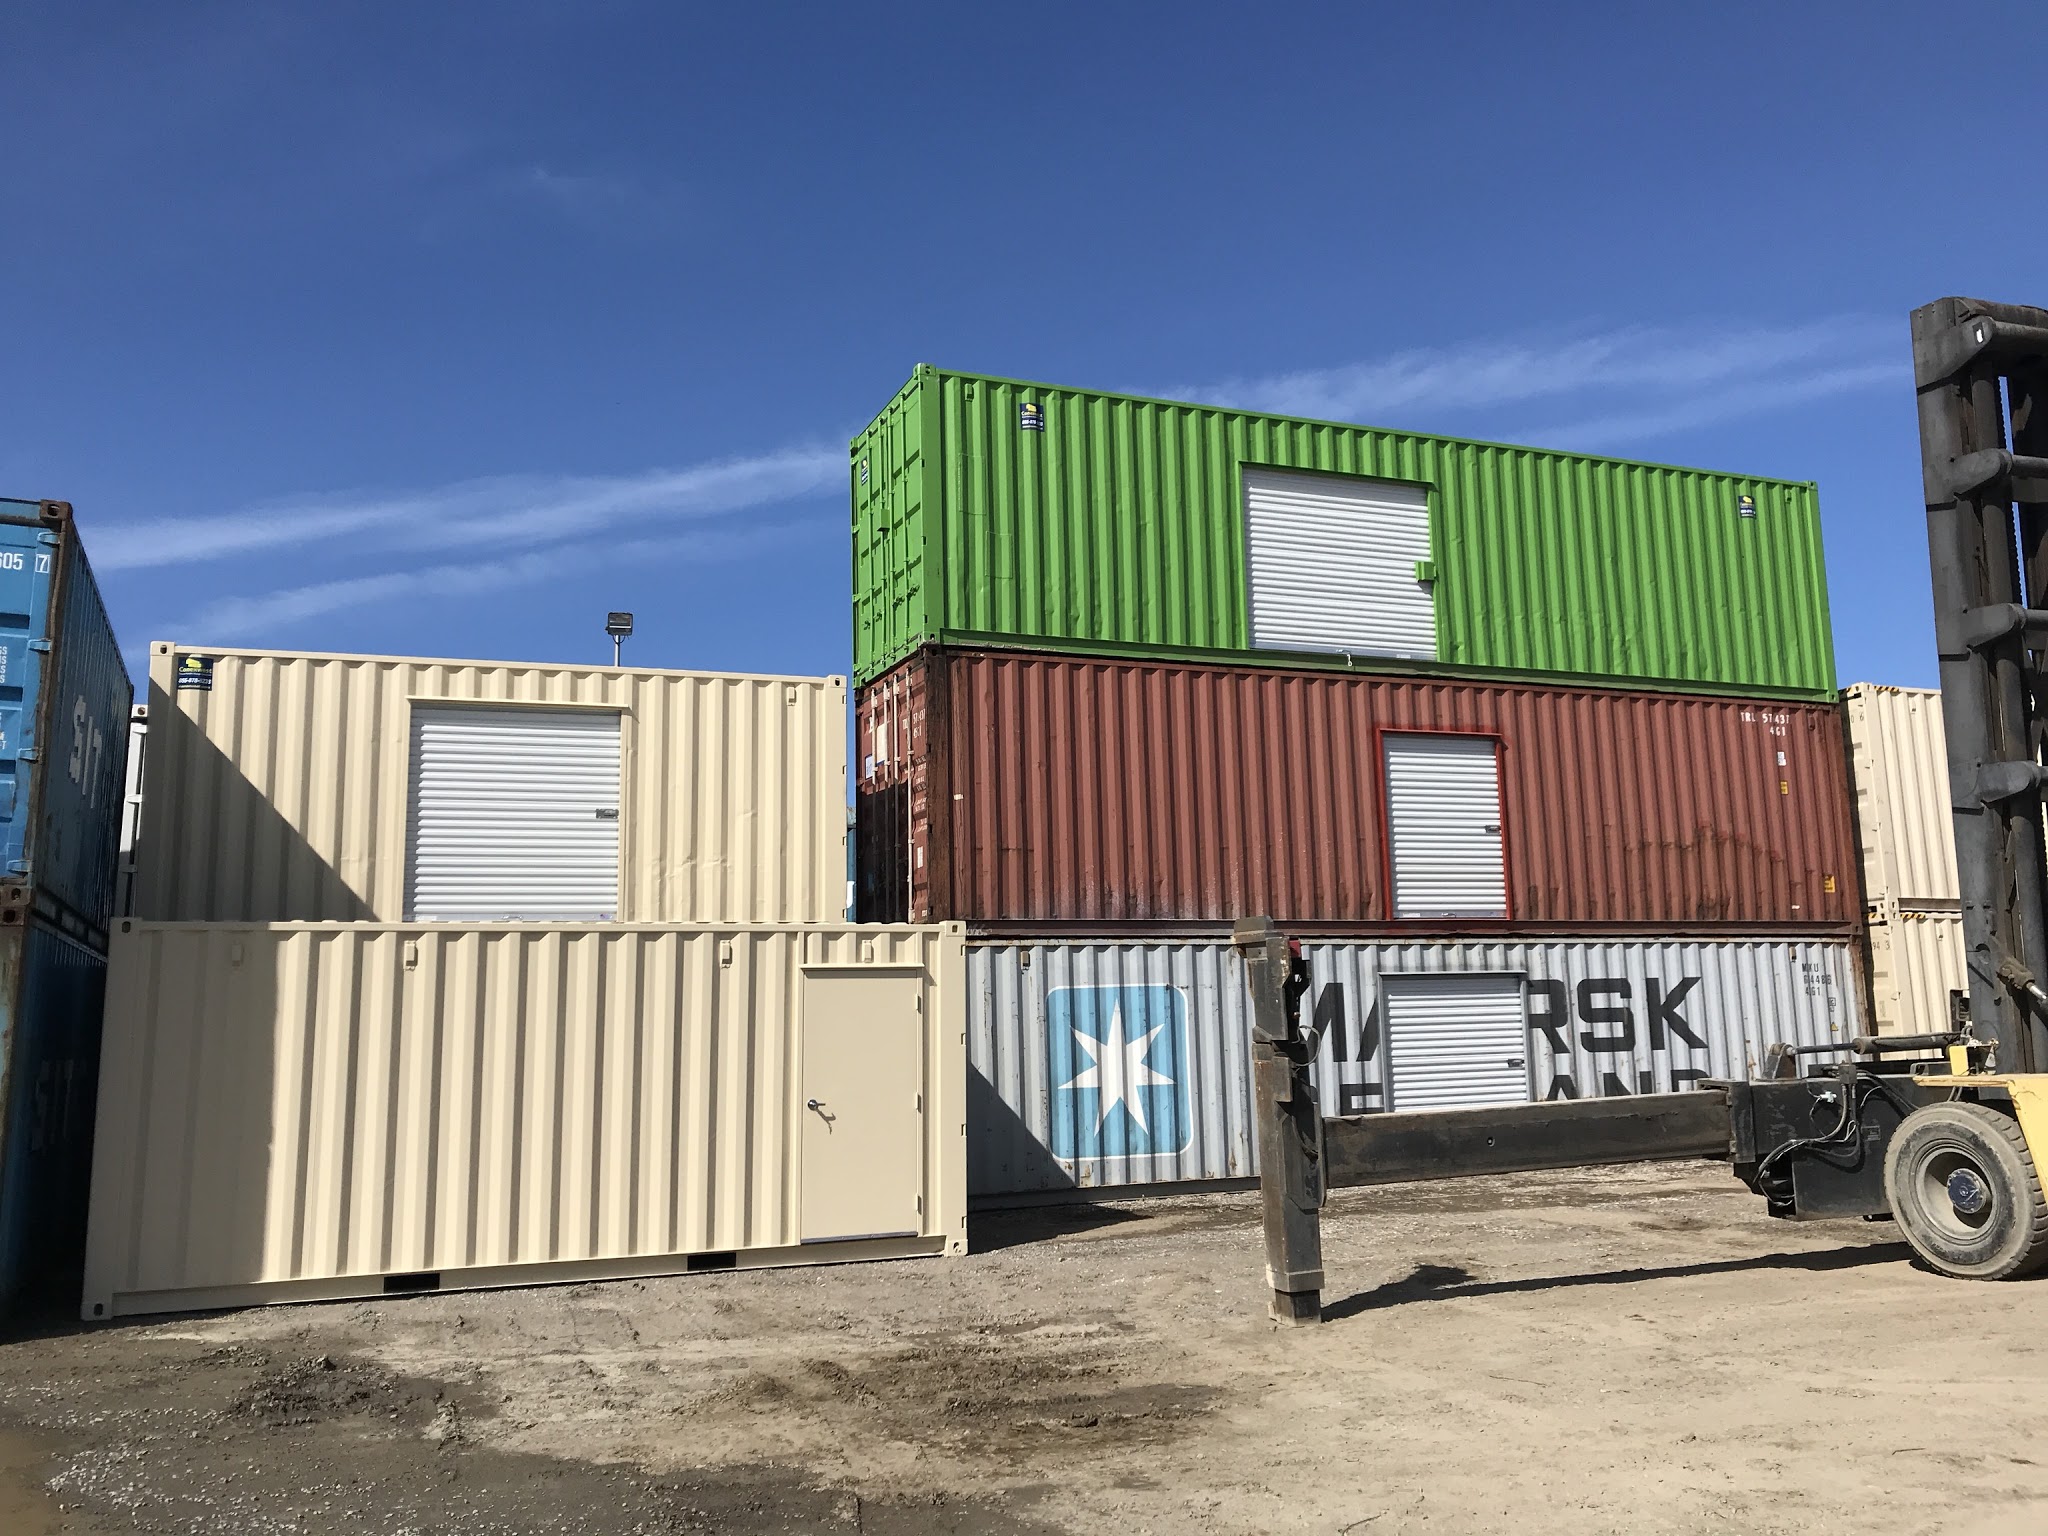 Roll-Up doors of shipping containers stacked on top of each other